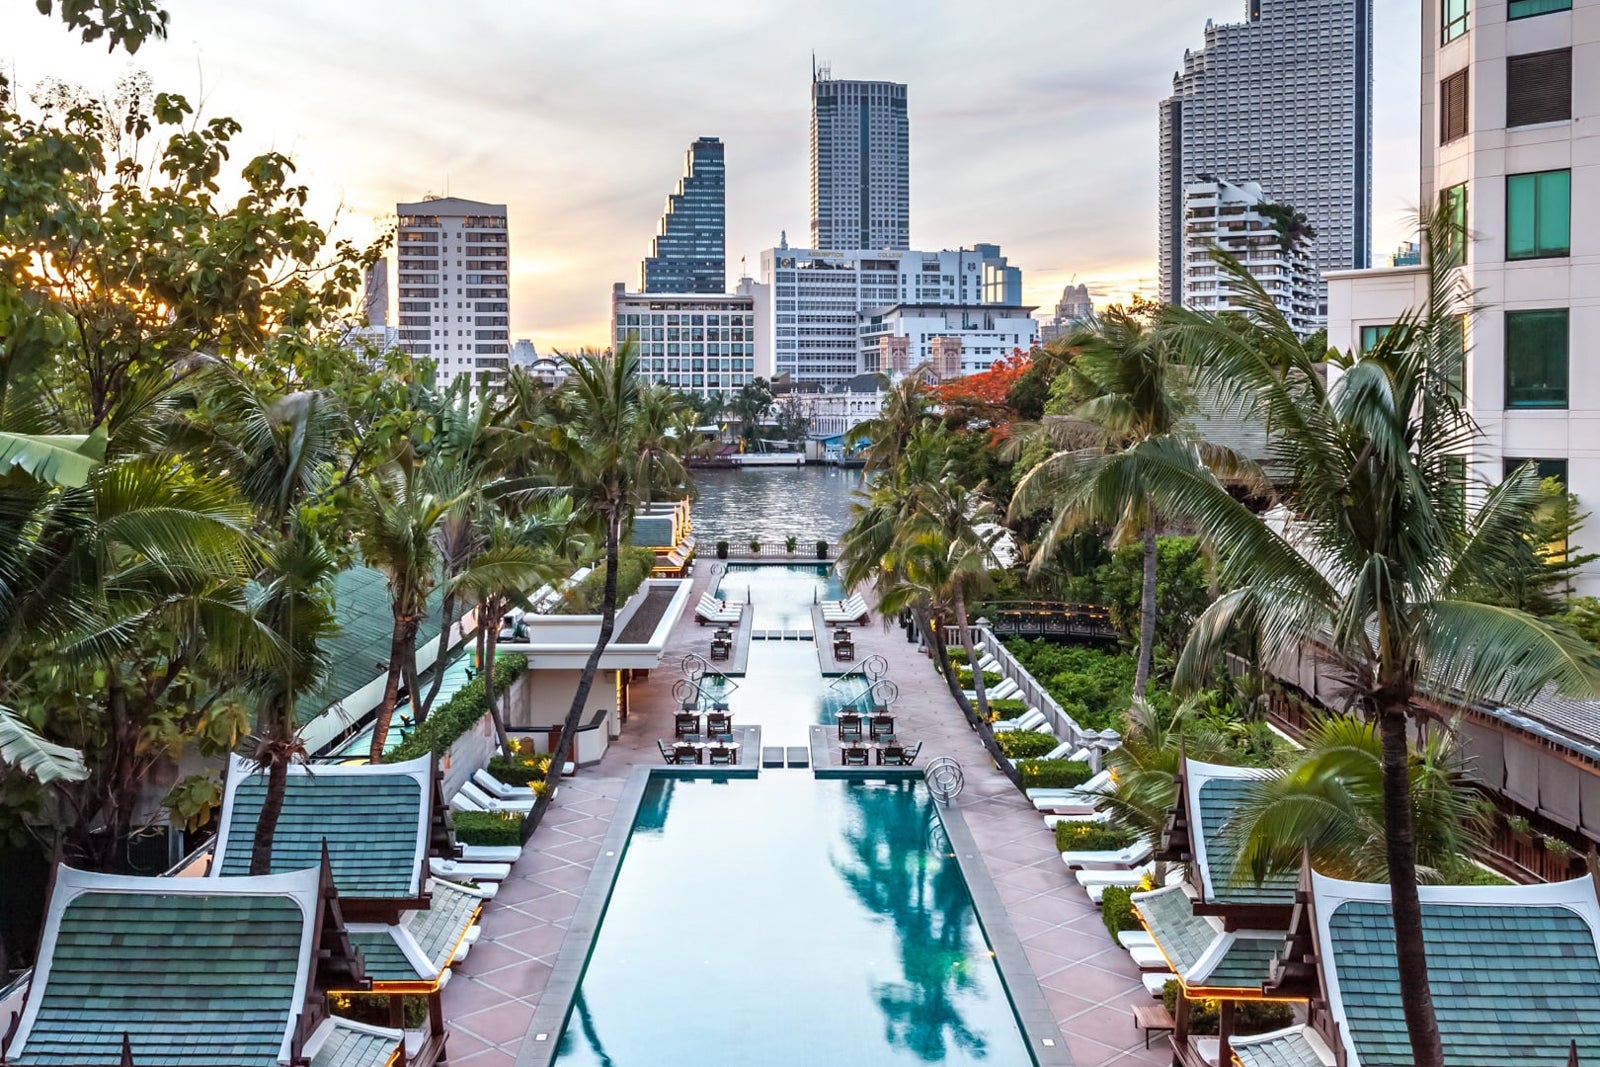 BEST HOTELS IN BANGKOK, THAILAND: Affordable & Luxury Hotels Guide